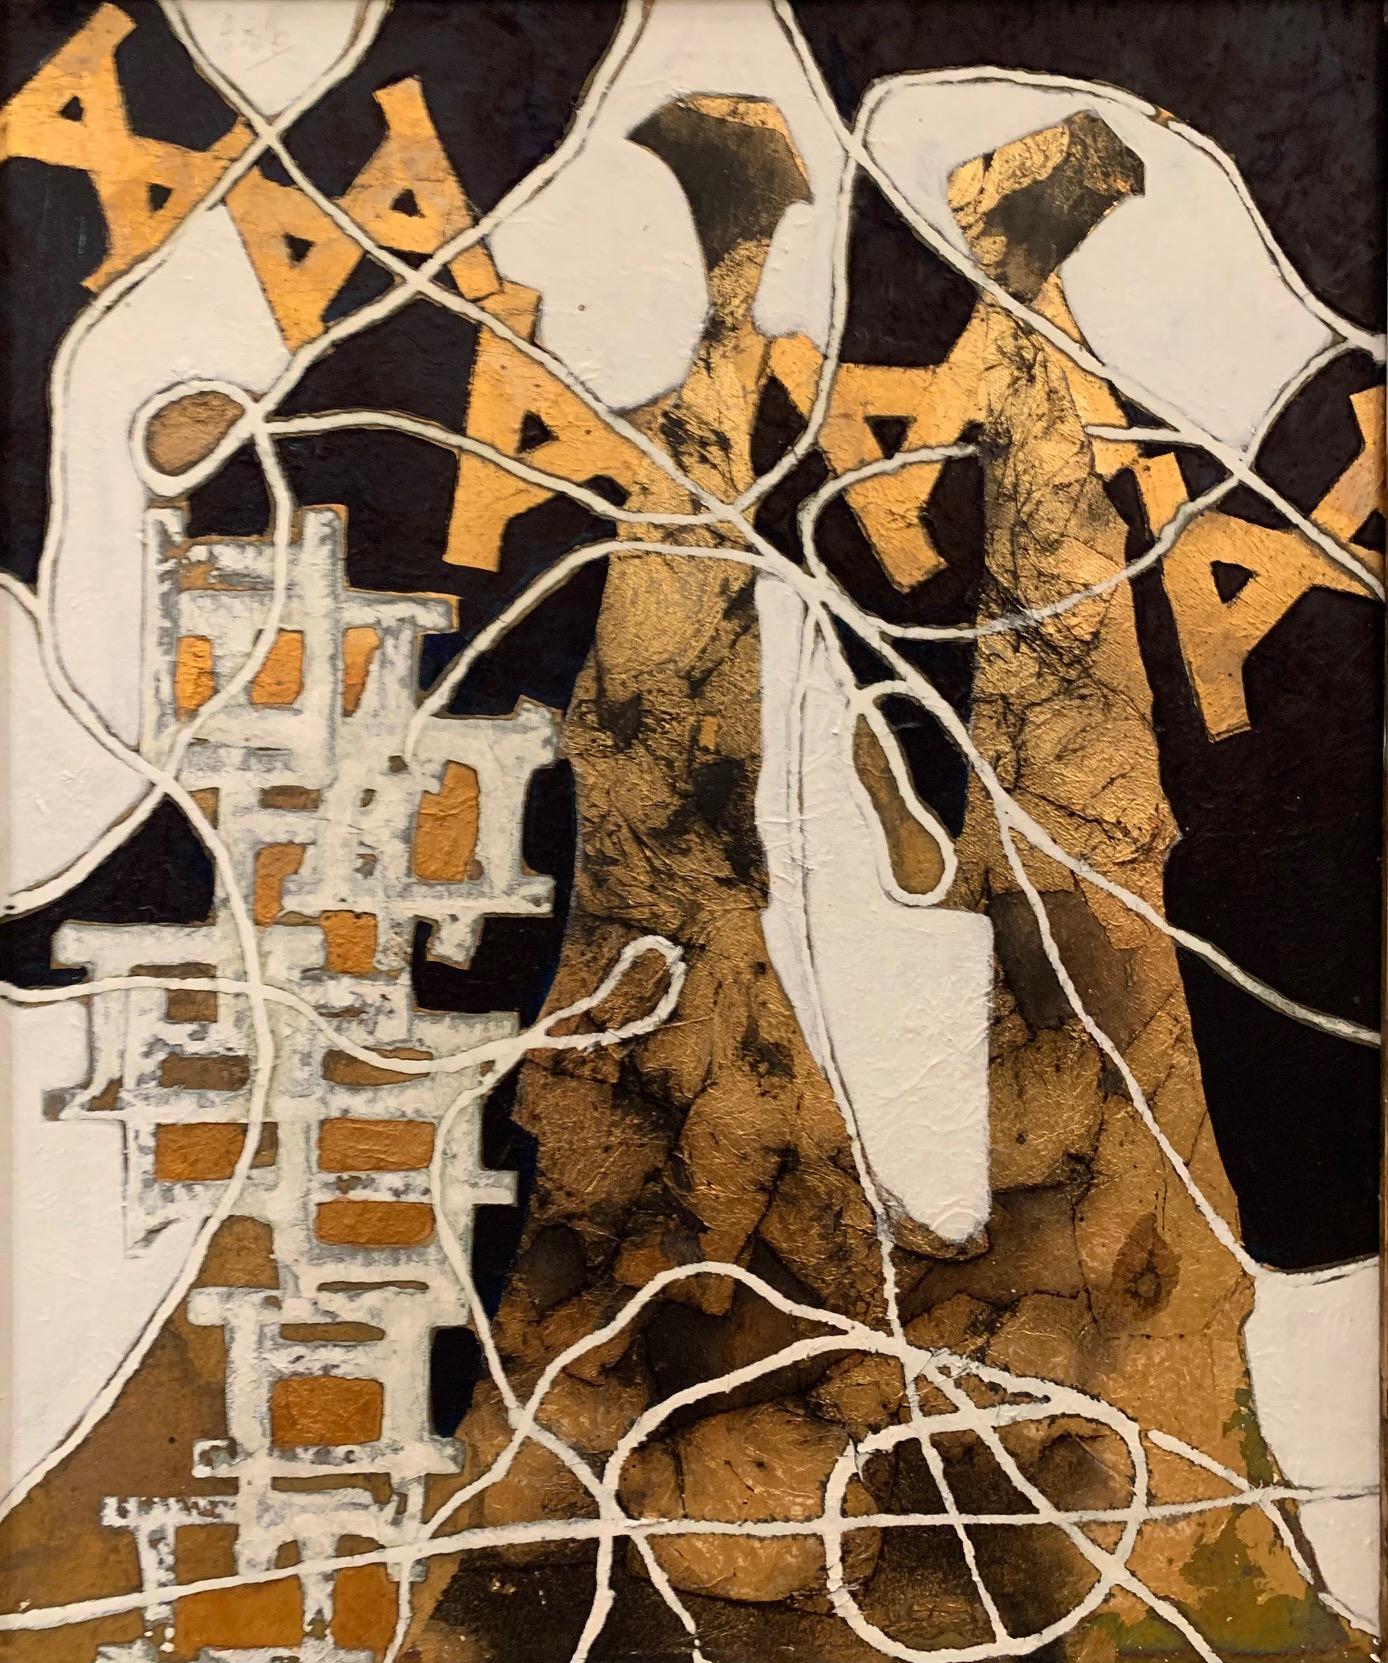 Intertwining Musical Mixed Media with Gold Leaf Painting by Andrea Stella - Mixed Media Art by ANDREA STELLA